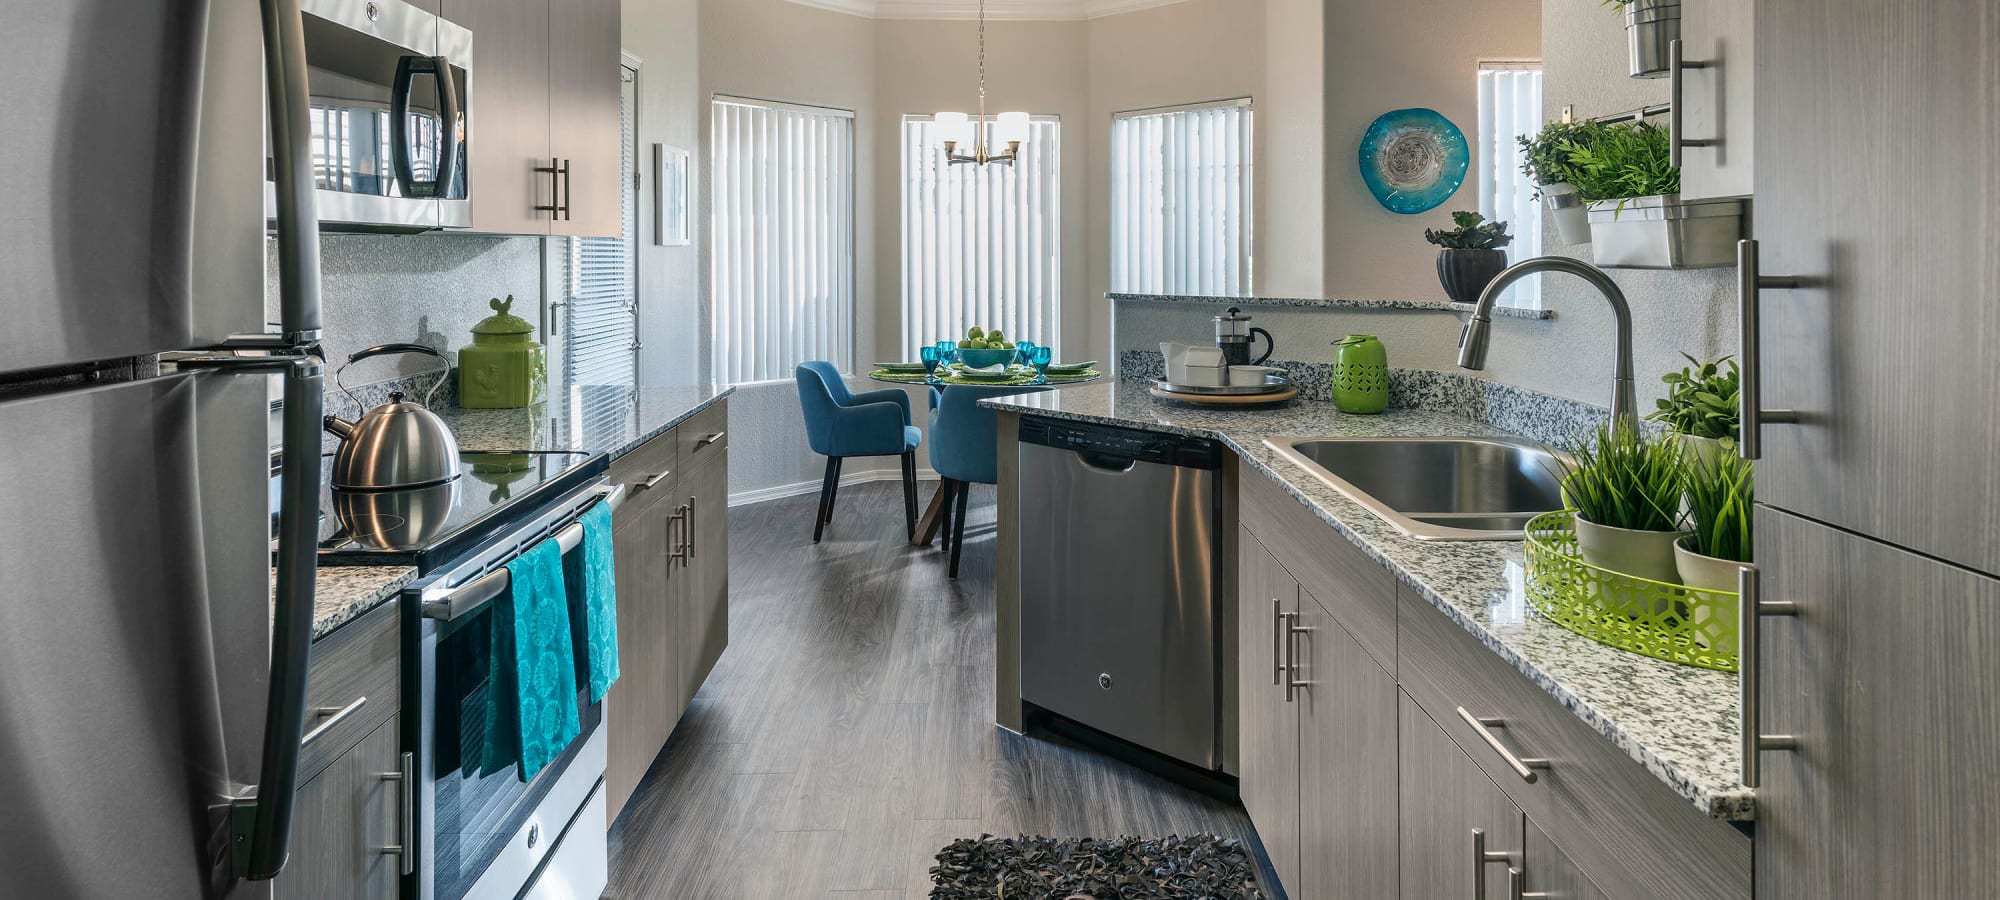 Stainless-steel appliances in the kitchen of a model home at Mira Santi in Chandler, Arizona